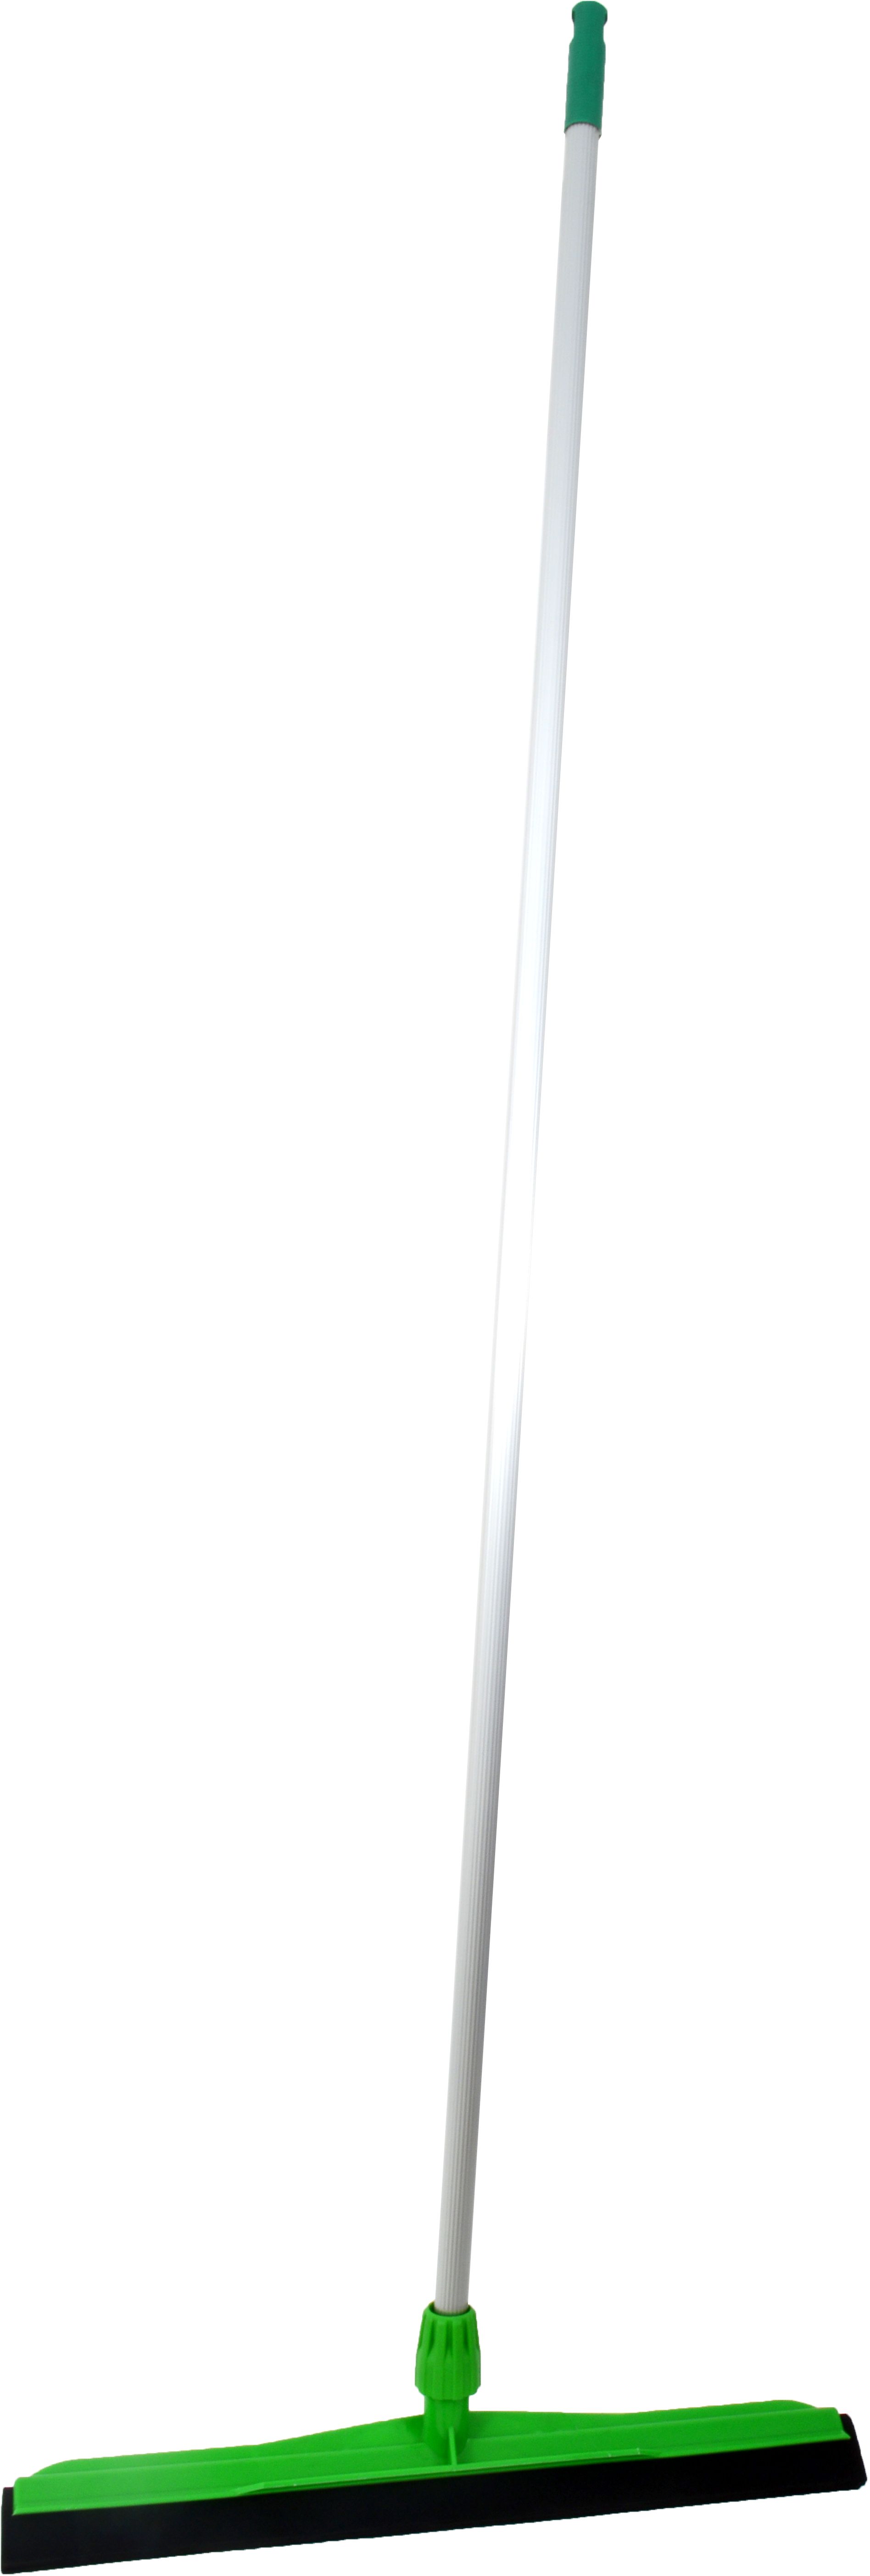 500mm Plastic Floor Squeegee with 1.5m Aluminium Handle (available in Blue, Green, Red, Yellow & White).